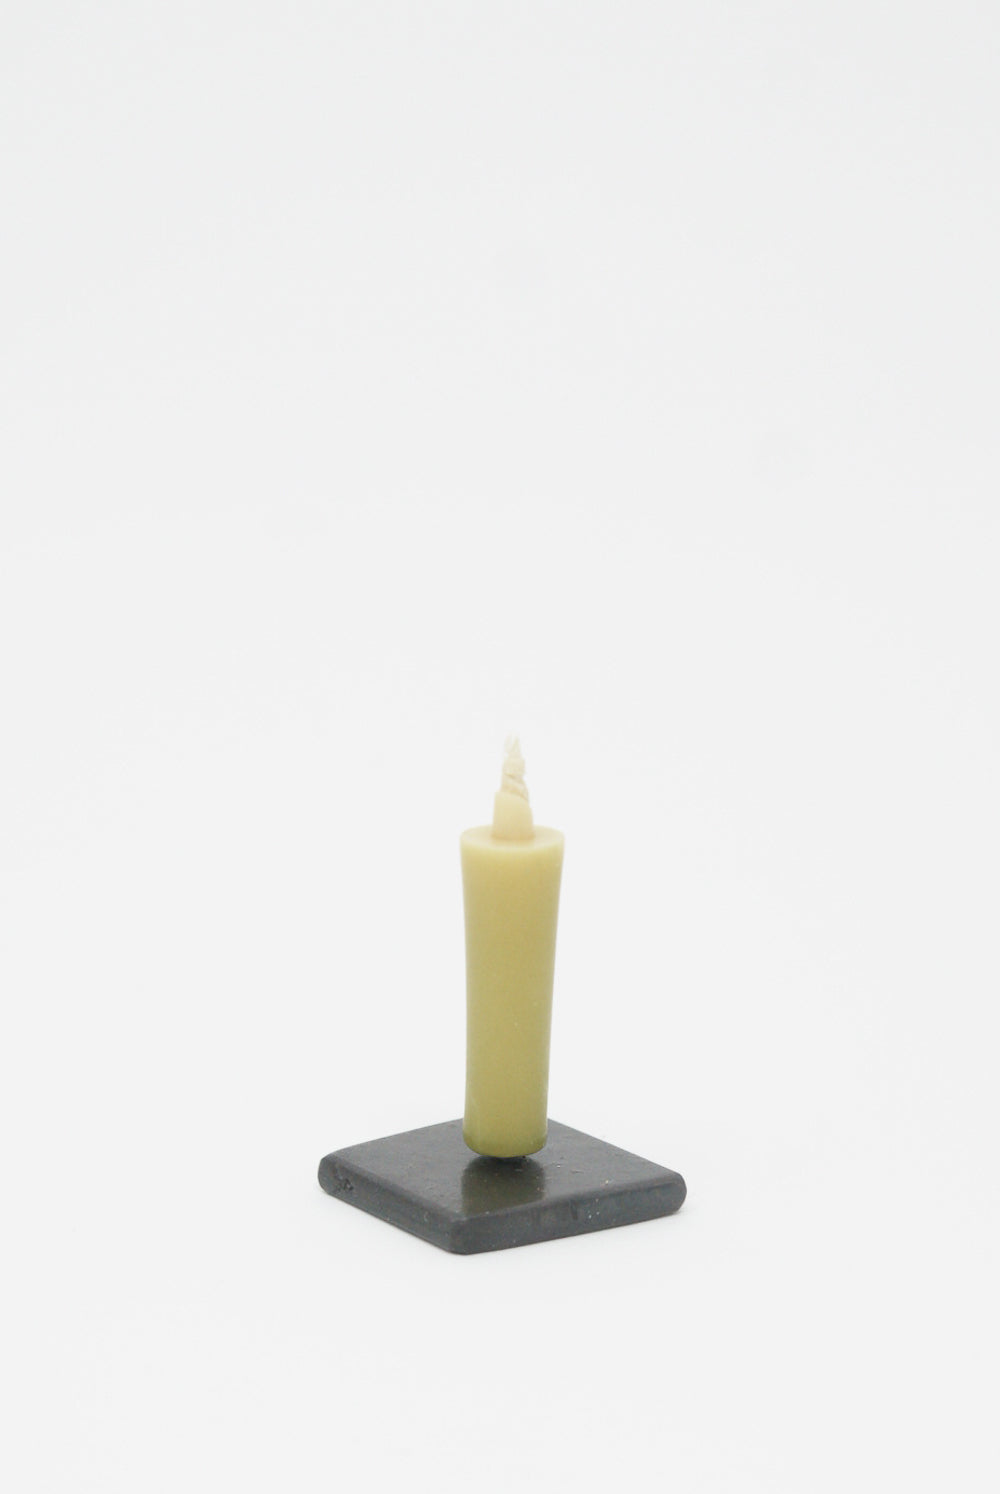 Daiyo - Iron Candle Stand shown with candle